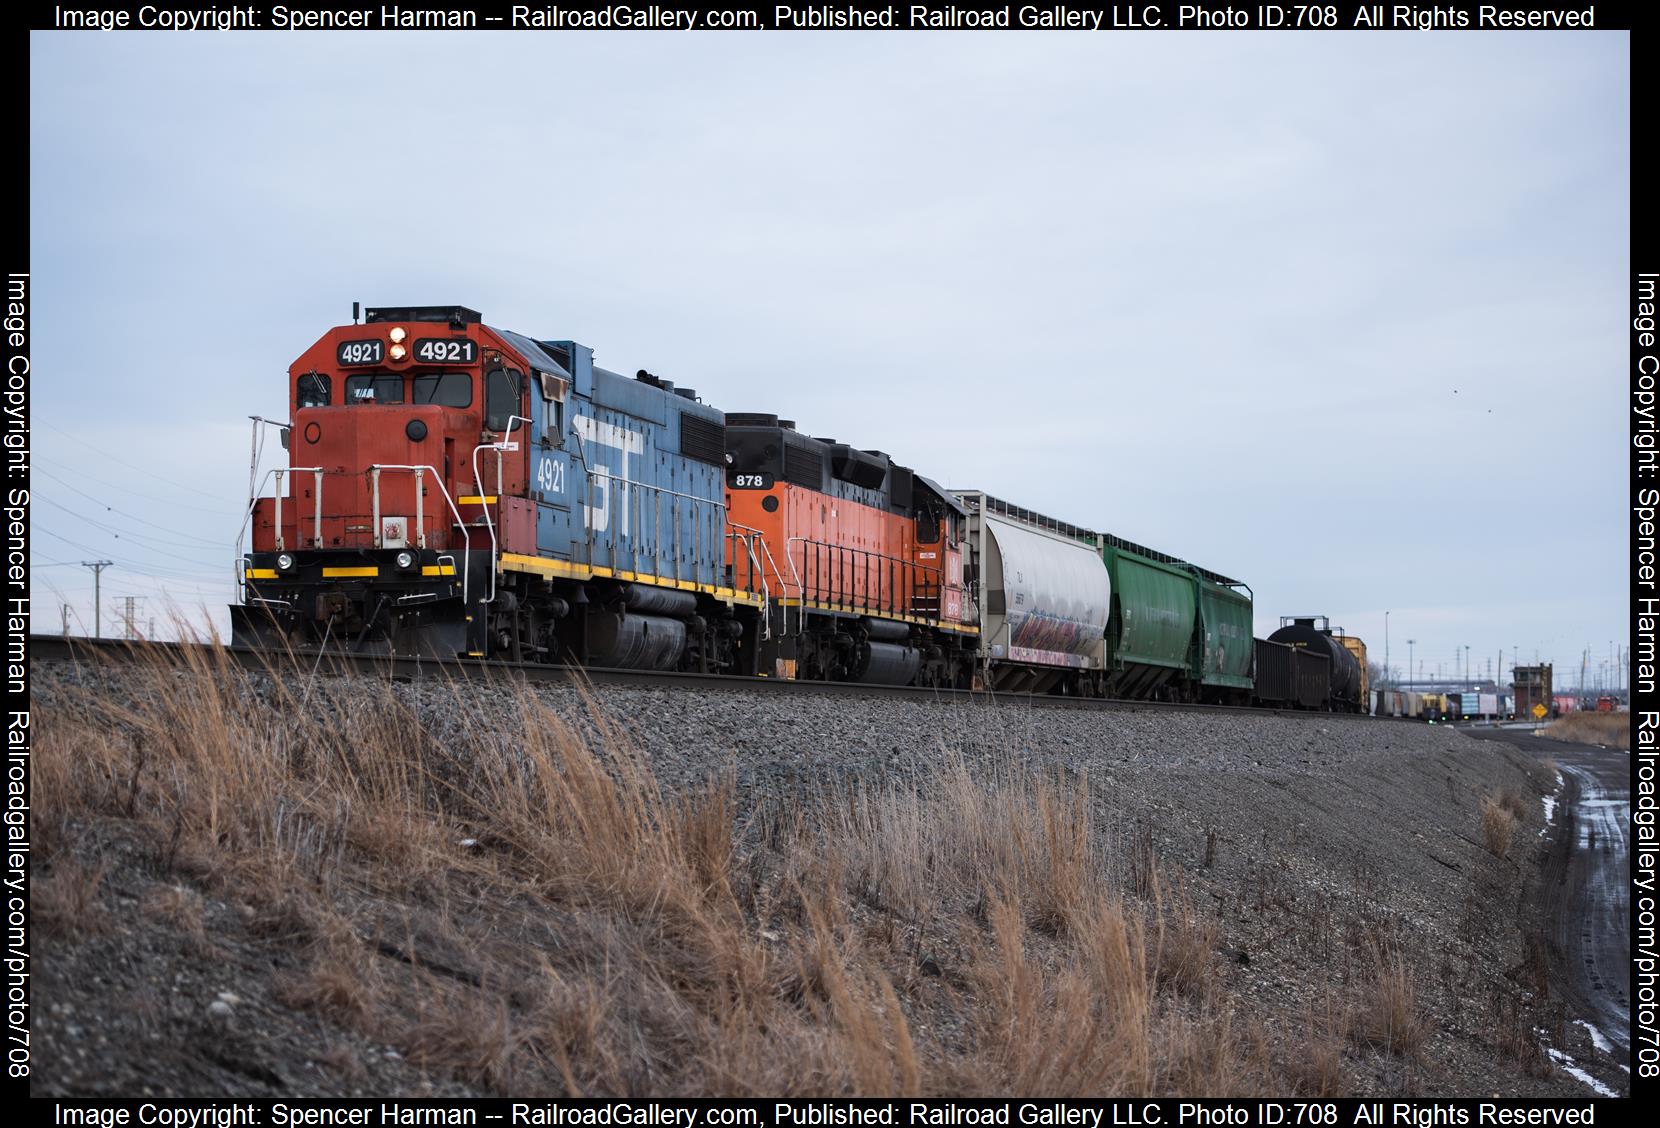 GTW 4921 is a class EMD GP38-2 and  is pictured in Gary, Indiana, USA.  This was taken along the Matteson Subdivision on the Canadian National Railway. Photo Copyright: Spencer Harman uploaded to Railroad Gallery on 02/18/2023. This photograph of GTW 4921 was taken on Saturday, February 18, 2023. All Rights Reserved. 